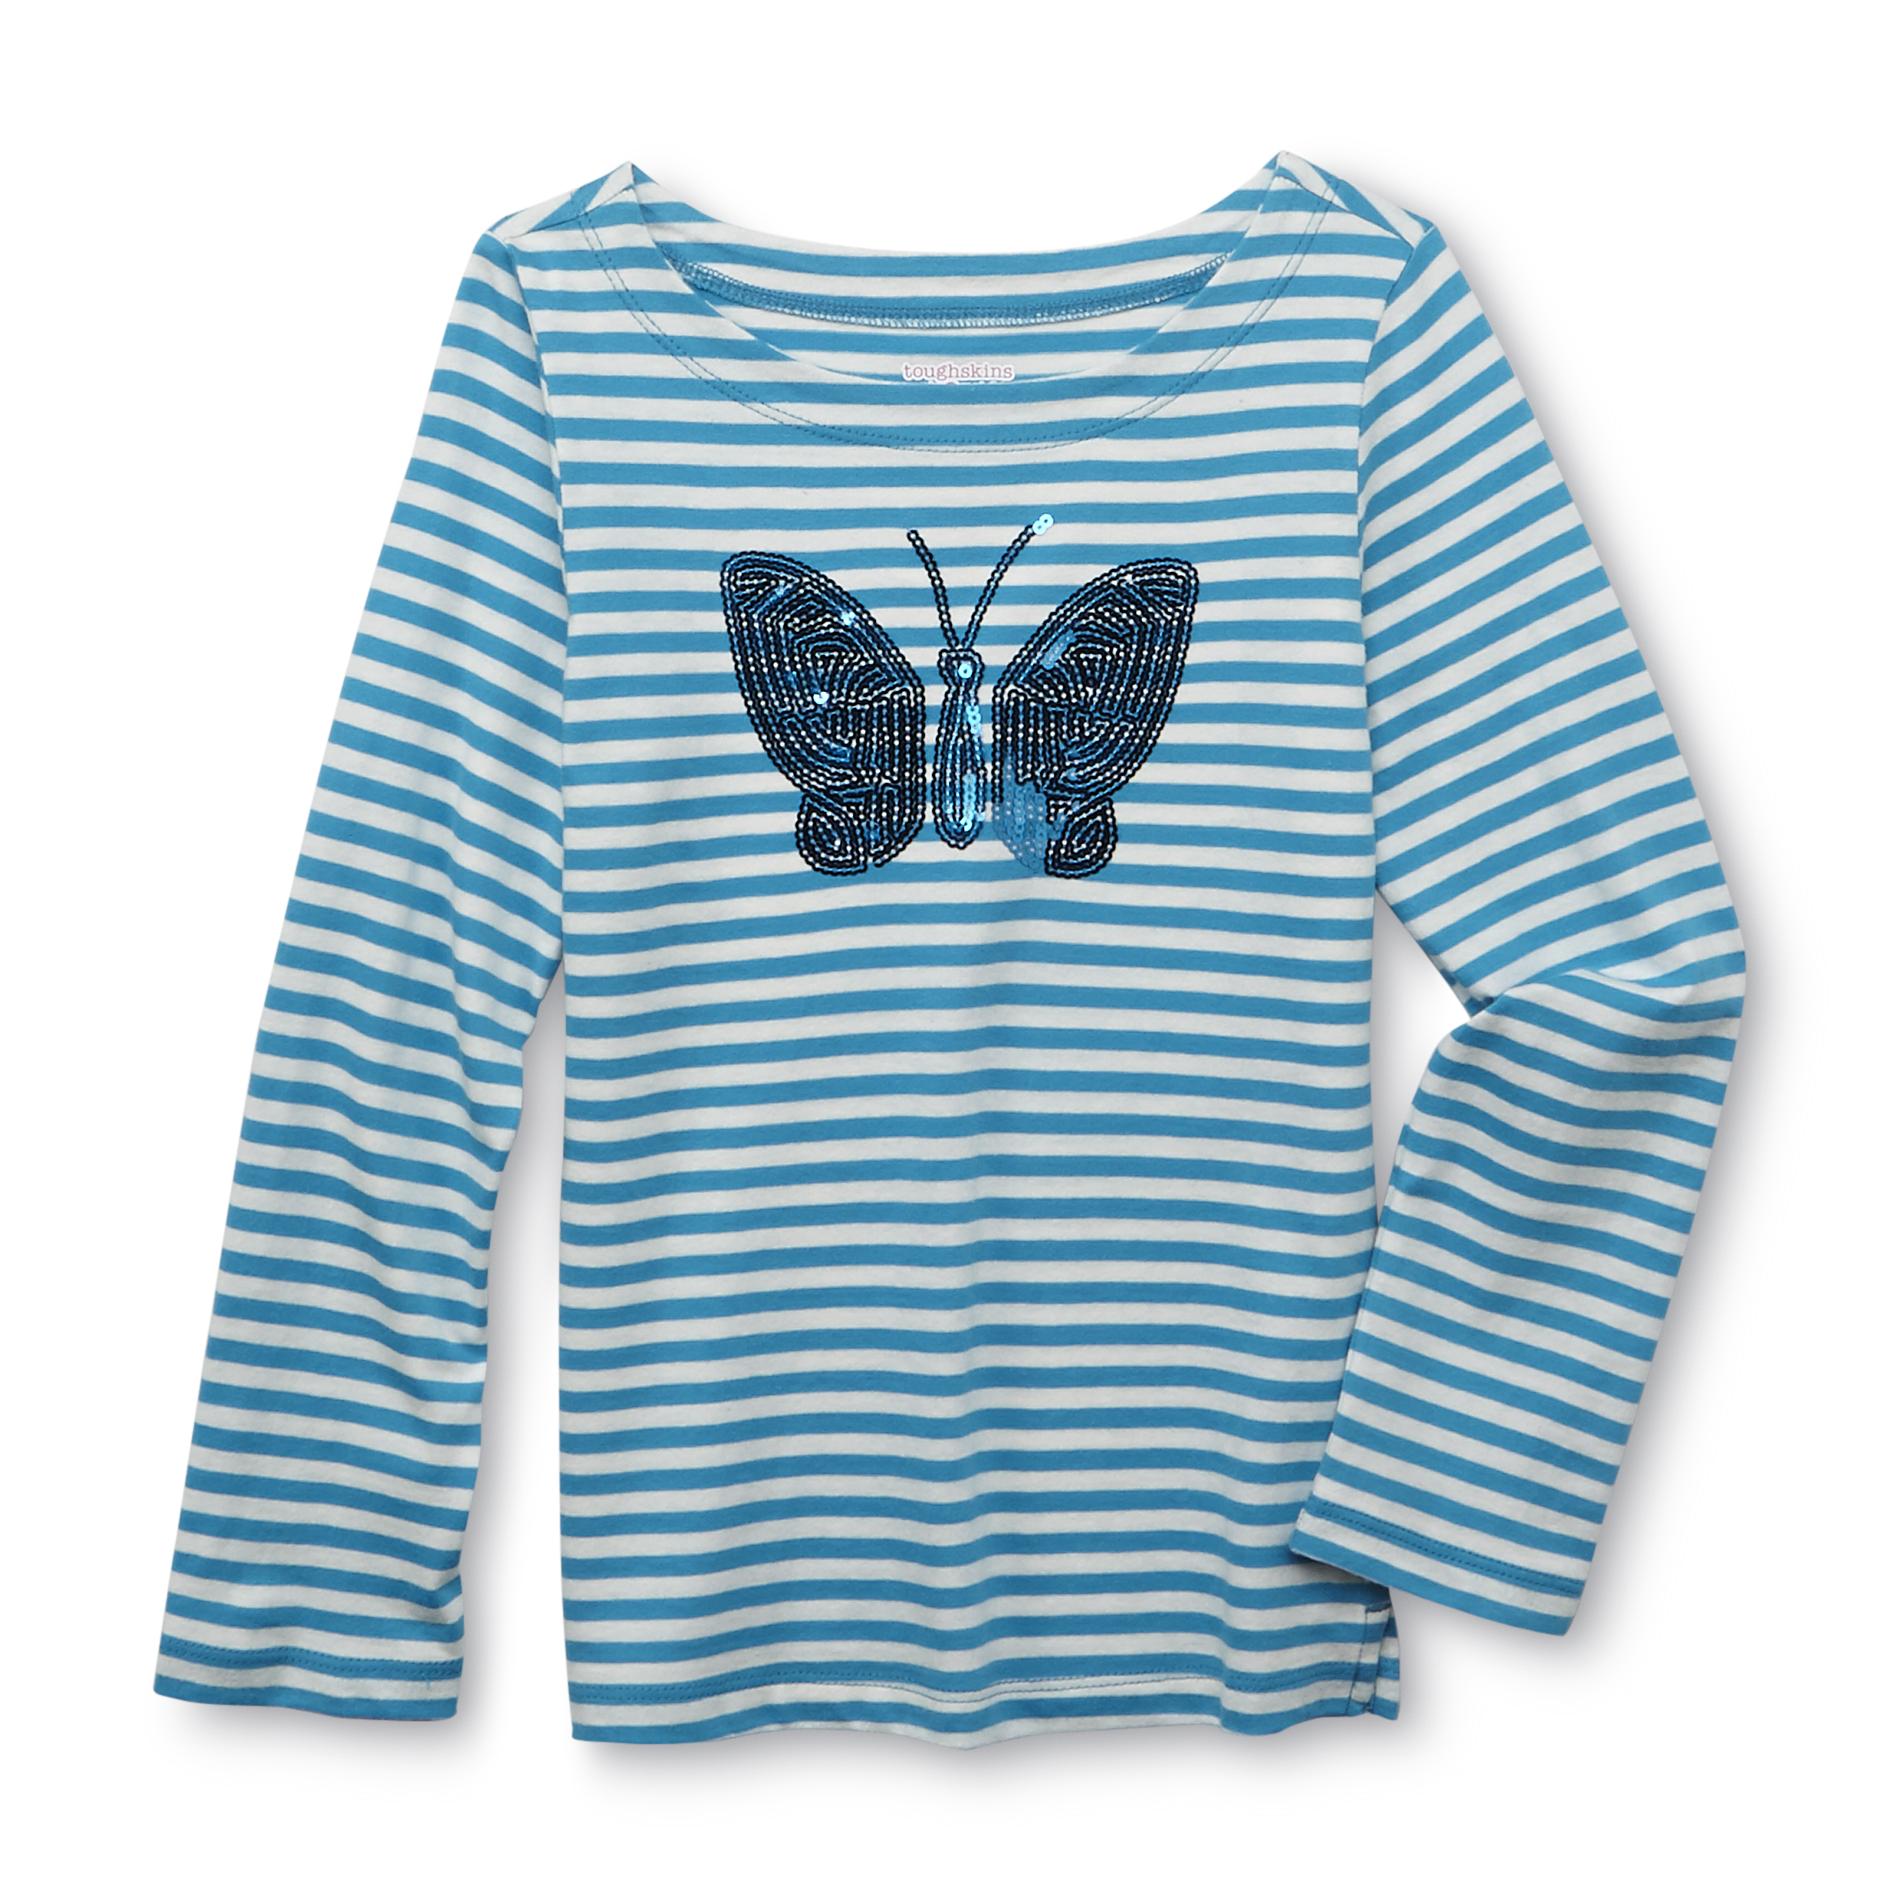 Toughskins Girl's Striped Sequined Top - Butterfly